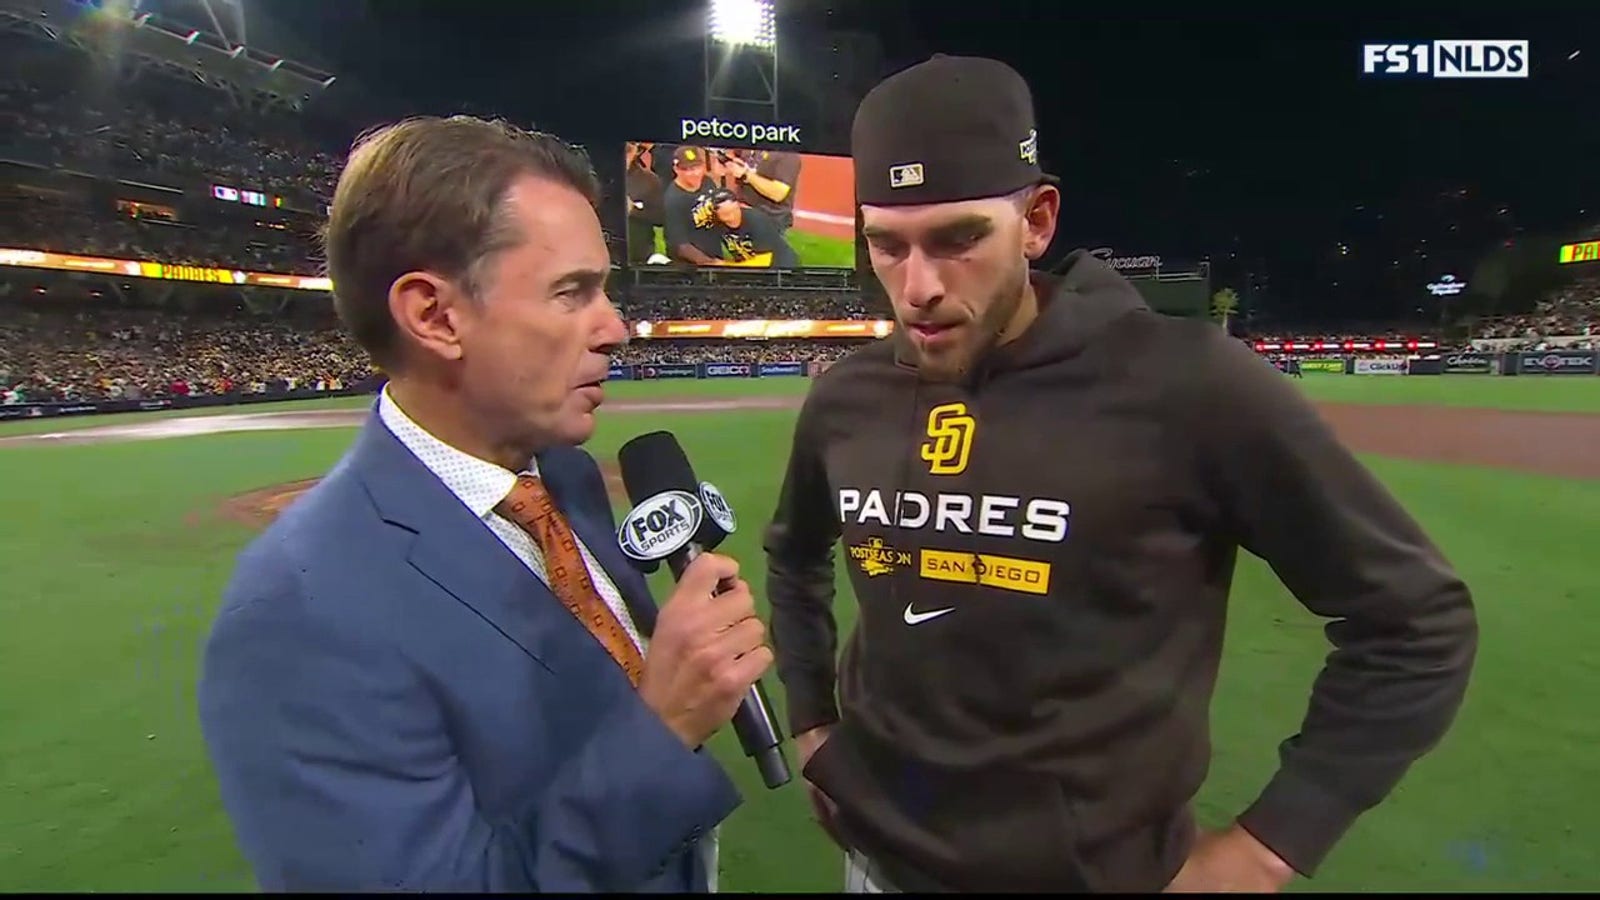 'This team is thirsty for a championship' — Joe Musgrove speaks with Tom Verducci after the Padres' win over Dodgers